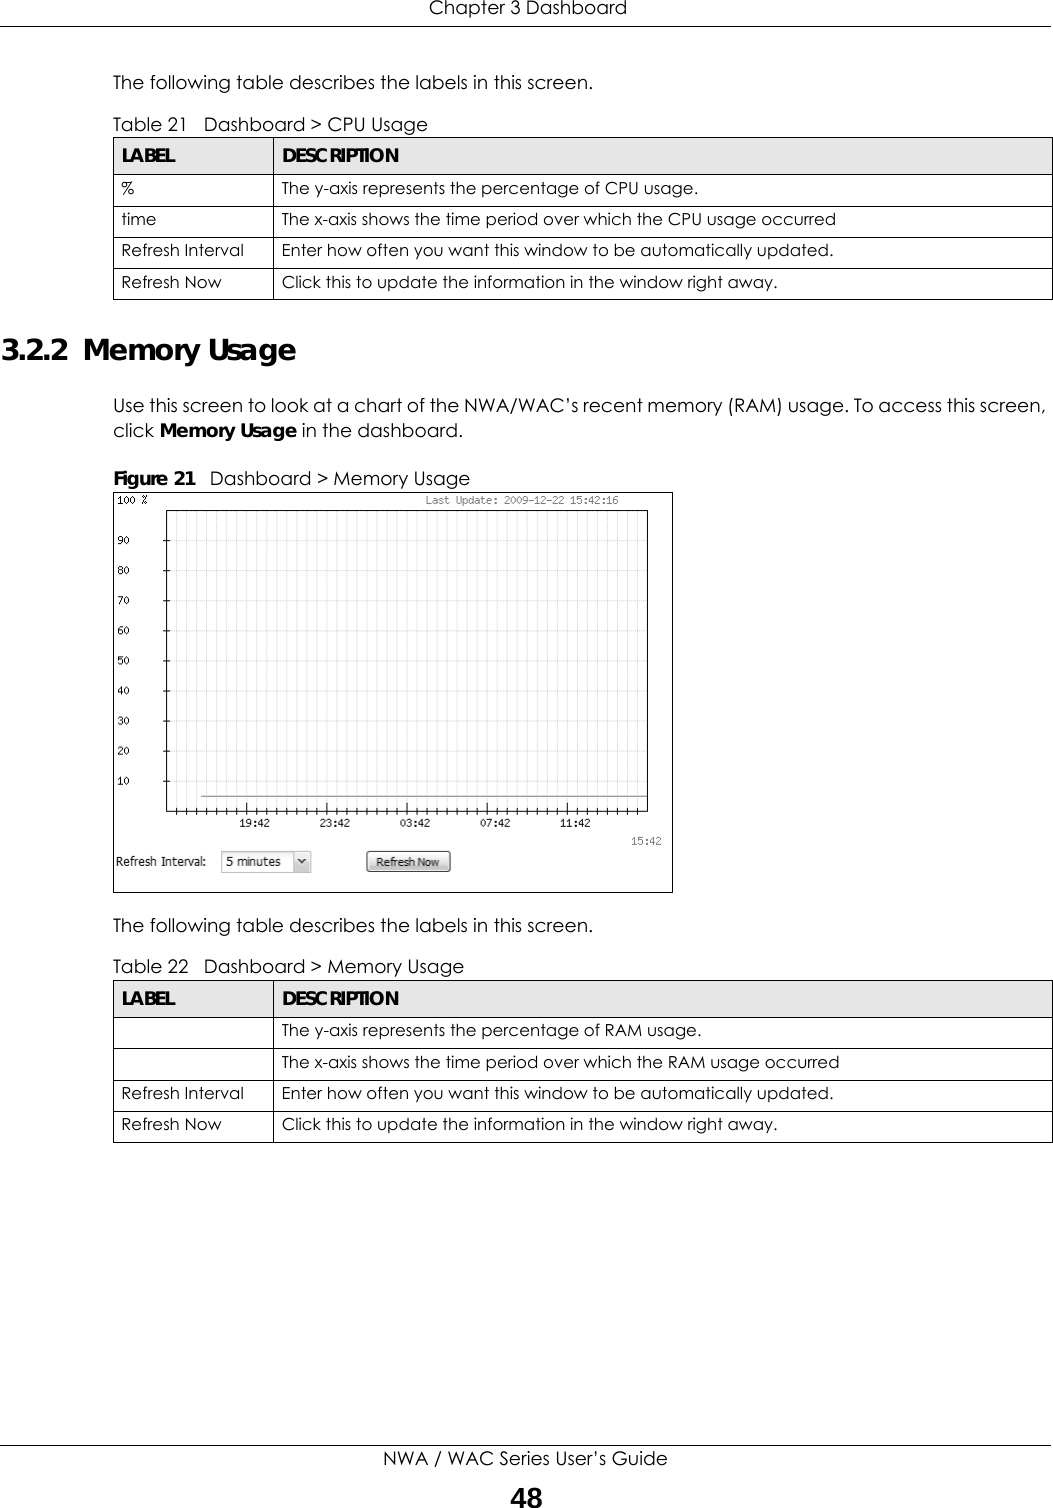  Chapter 3 DashboardNWA / WAC Series User’s Guide48The following table describes the labels in this screen.  3.2.2  Memory UsageUse this screen to look at a chart of the NWA/WAC’s recent memory (RAM) usage. To access this screen, click Memory Usage in the dashboard.Figure 21   Dashboard &gt; Memory UsageThe following table describes the labels in this screen.  Table 21   Dashboard &gt; CPU UsageLABEL DESCRIPTION% The y-axis represents the percentage of CPU usage.time The x-axis shows the time period over which the CPU usage occurredRefresh Interval Enter how often you want this window to be automatically updated.Refresh Now Click this to update the information in the window right away. Table 22   Dashboard &gt; Memory UsageLABEL DESCRIPTIONThe y-axis represents the percentage of RAM usage.The x-axis shows the time period over which the RAM usage occurredRefresh Interval Enter how often you want this window to be automatically updated.Refresh Now Click this to update the information in the window right away. 